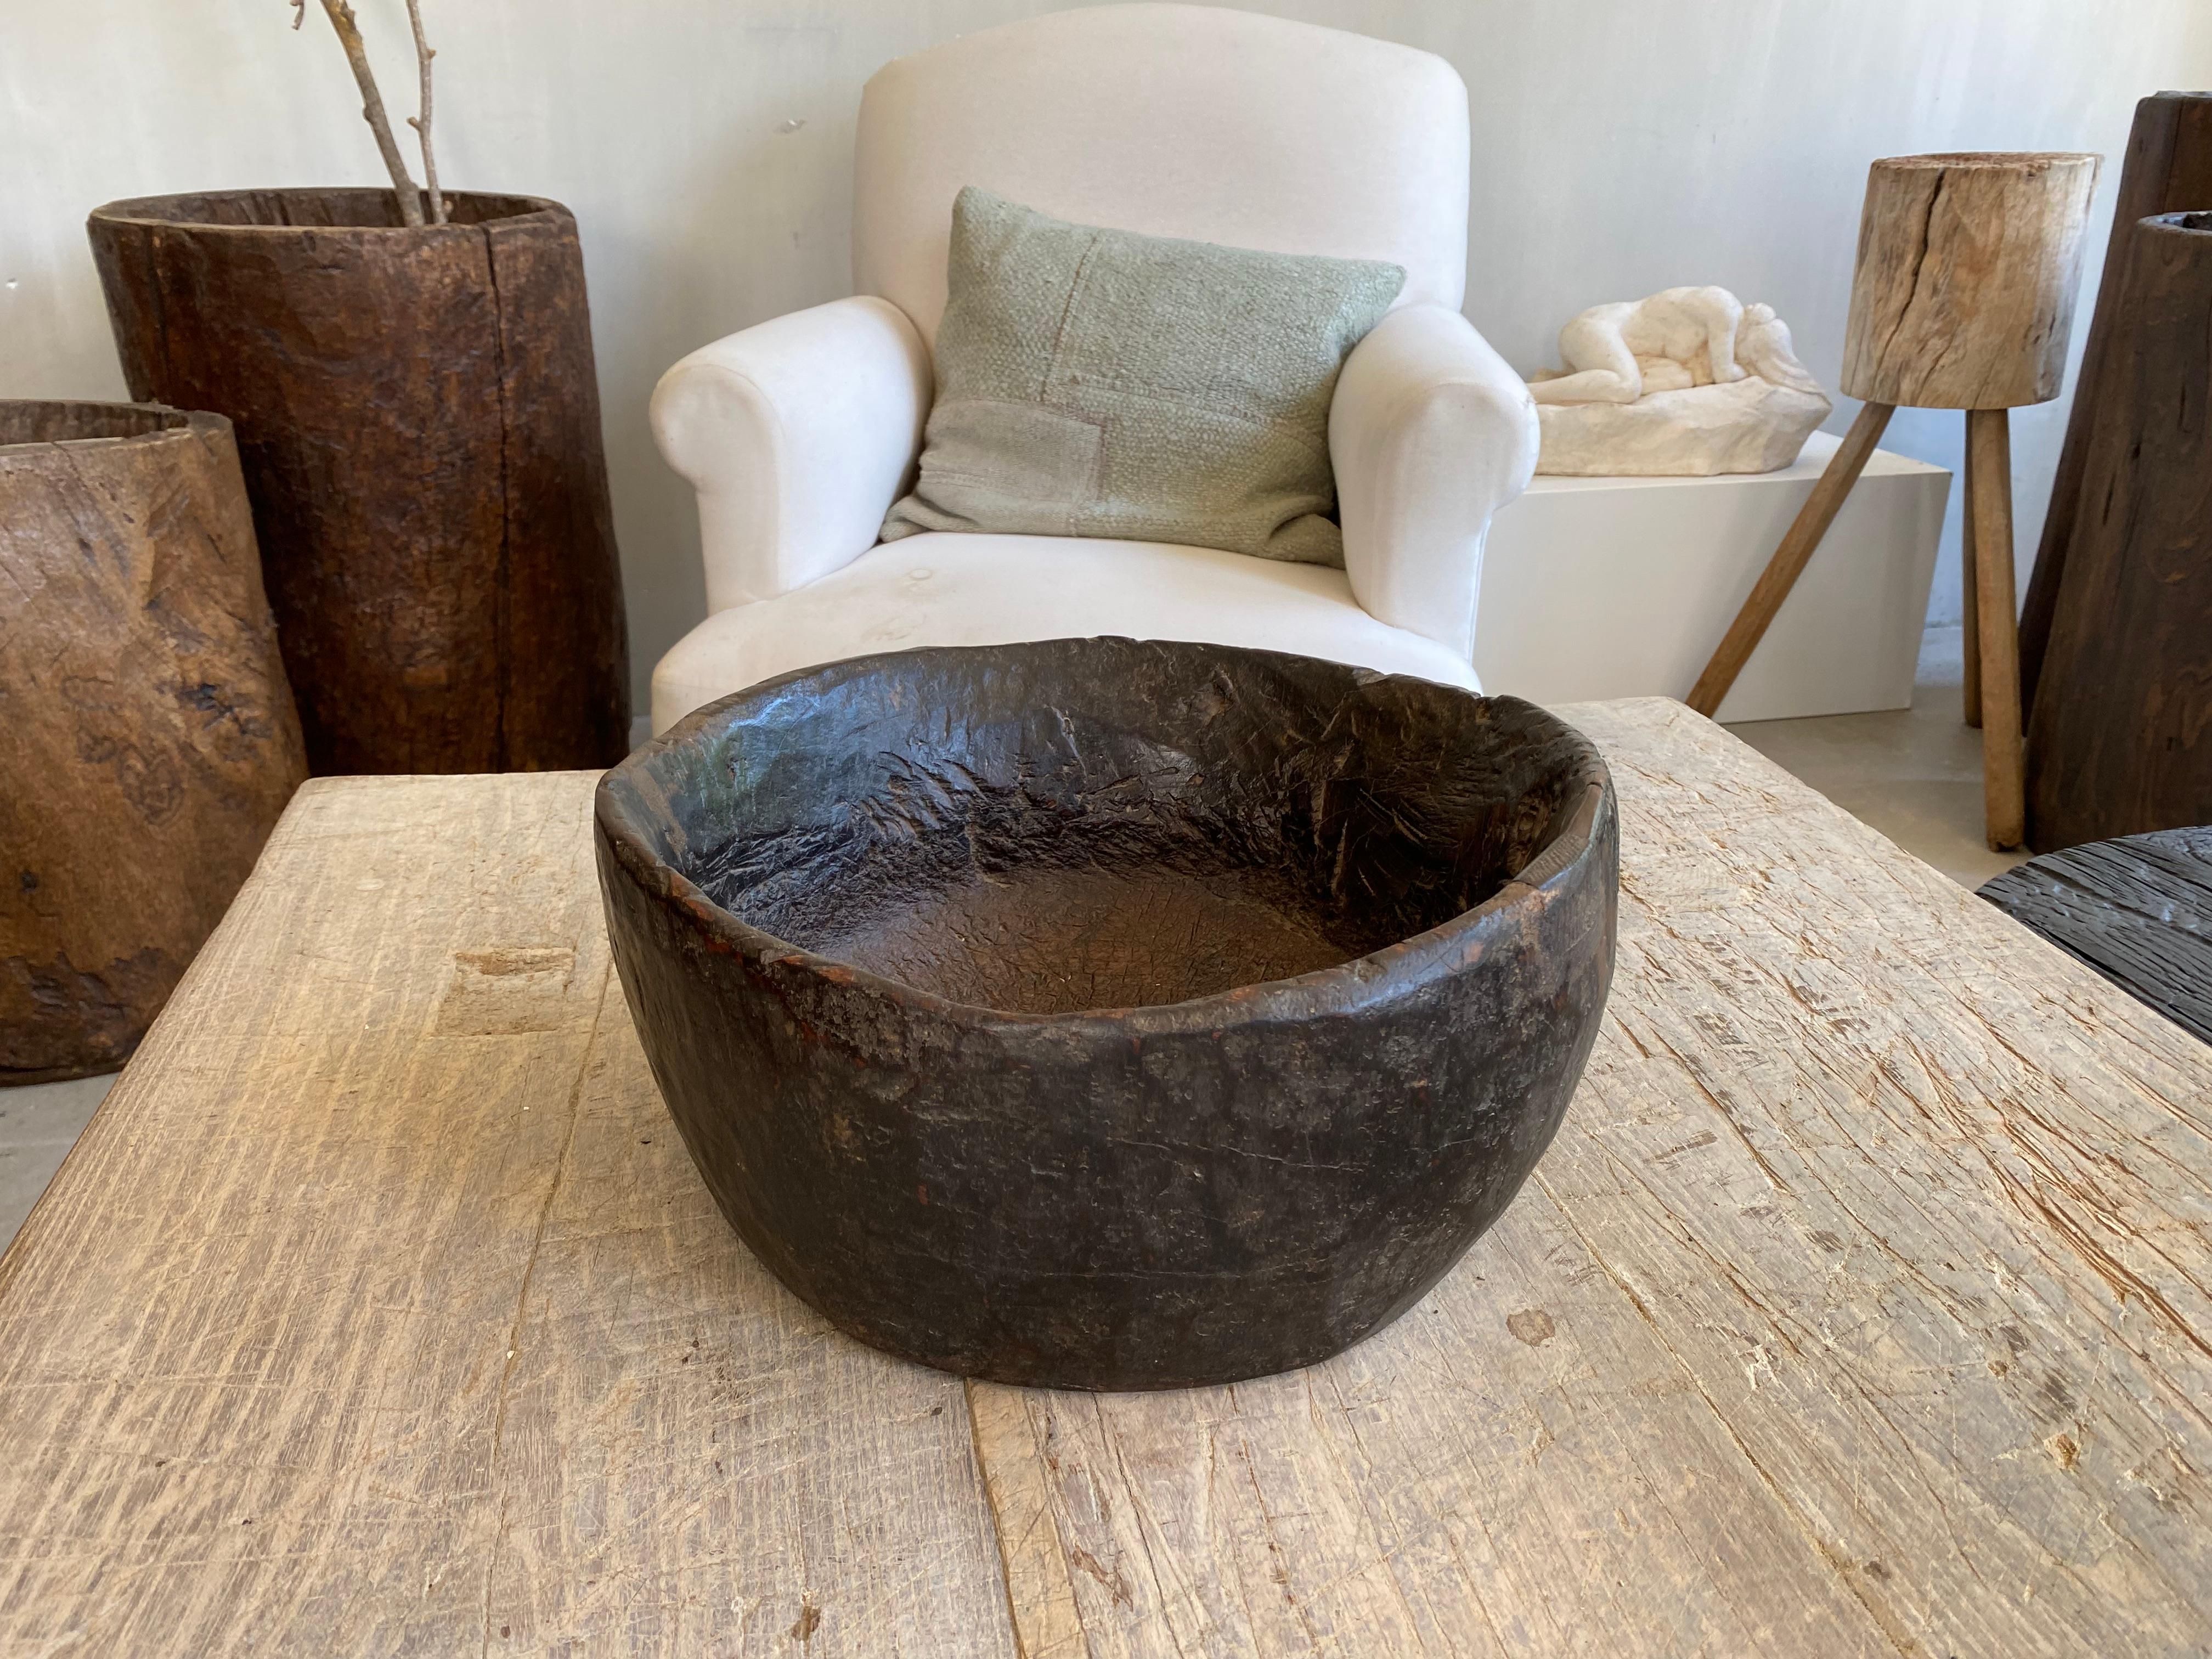 Early 20th Century Antique Walnut Wooden Bowl For Sale